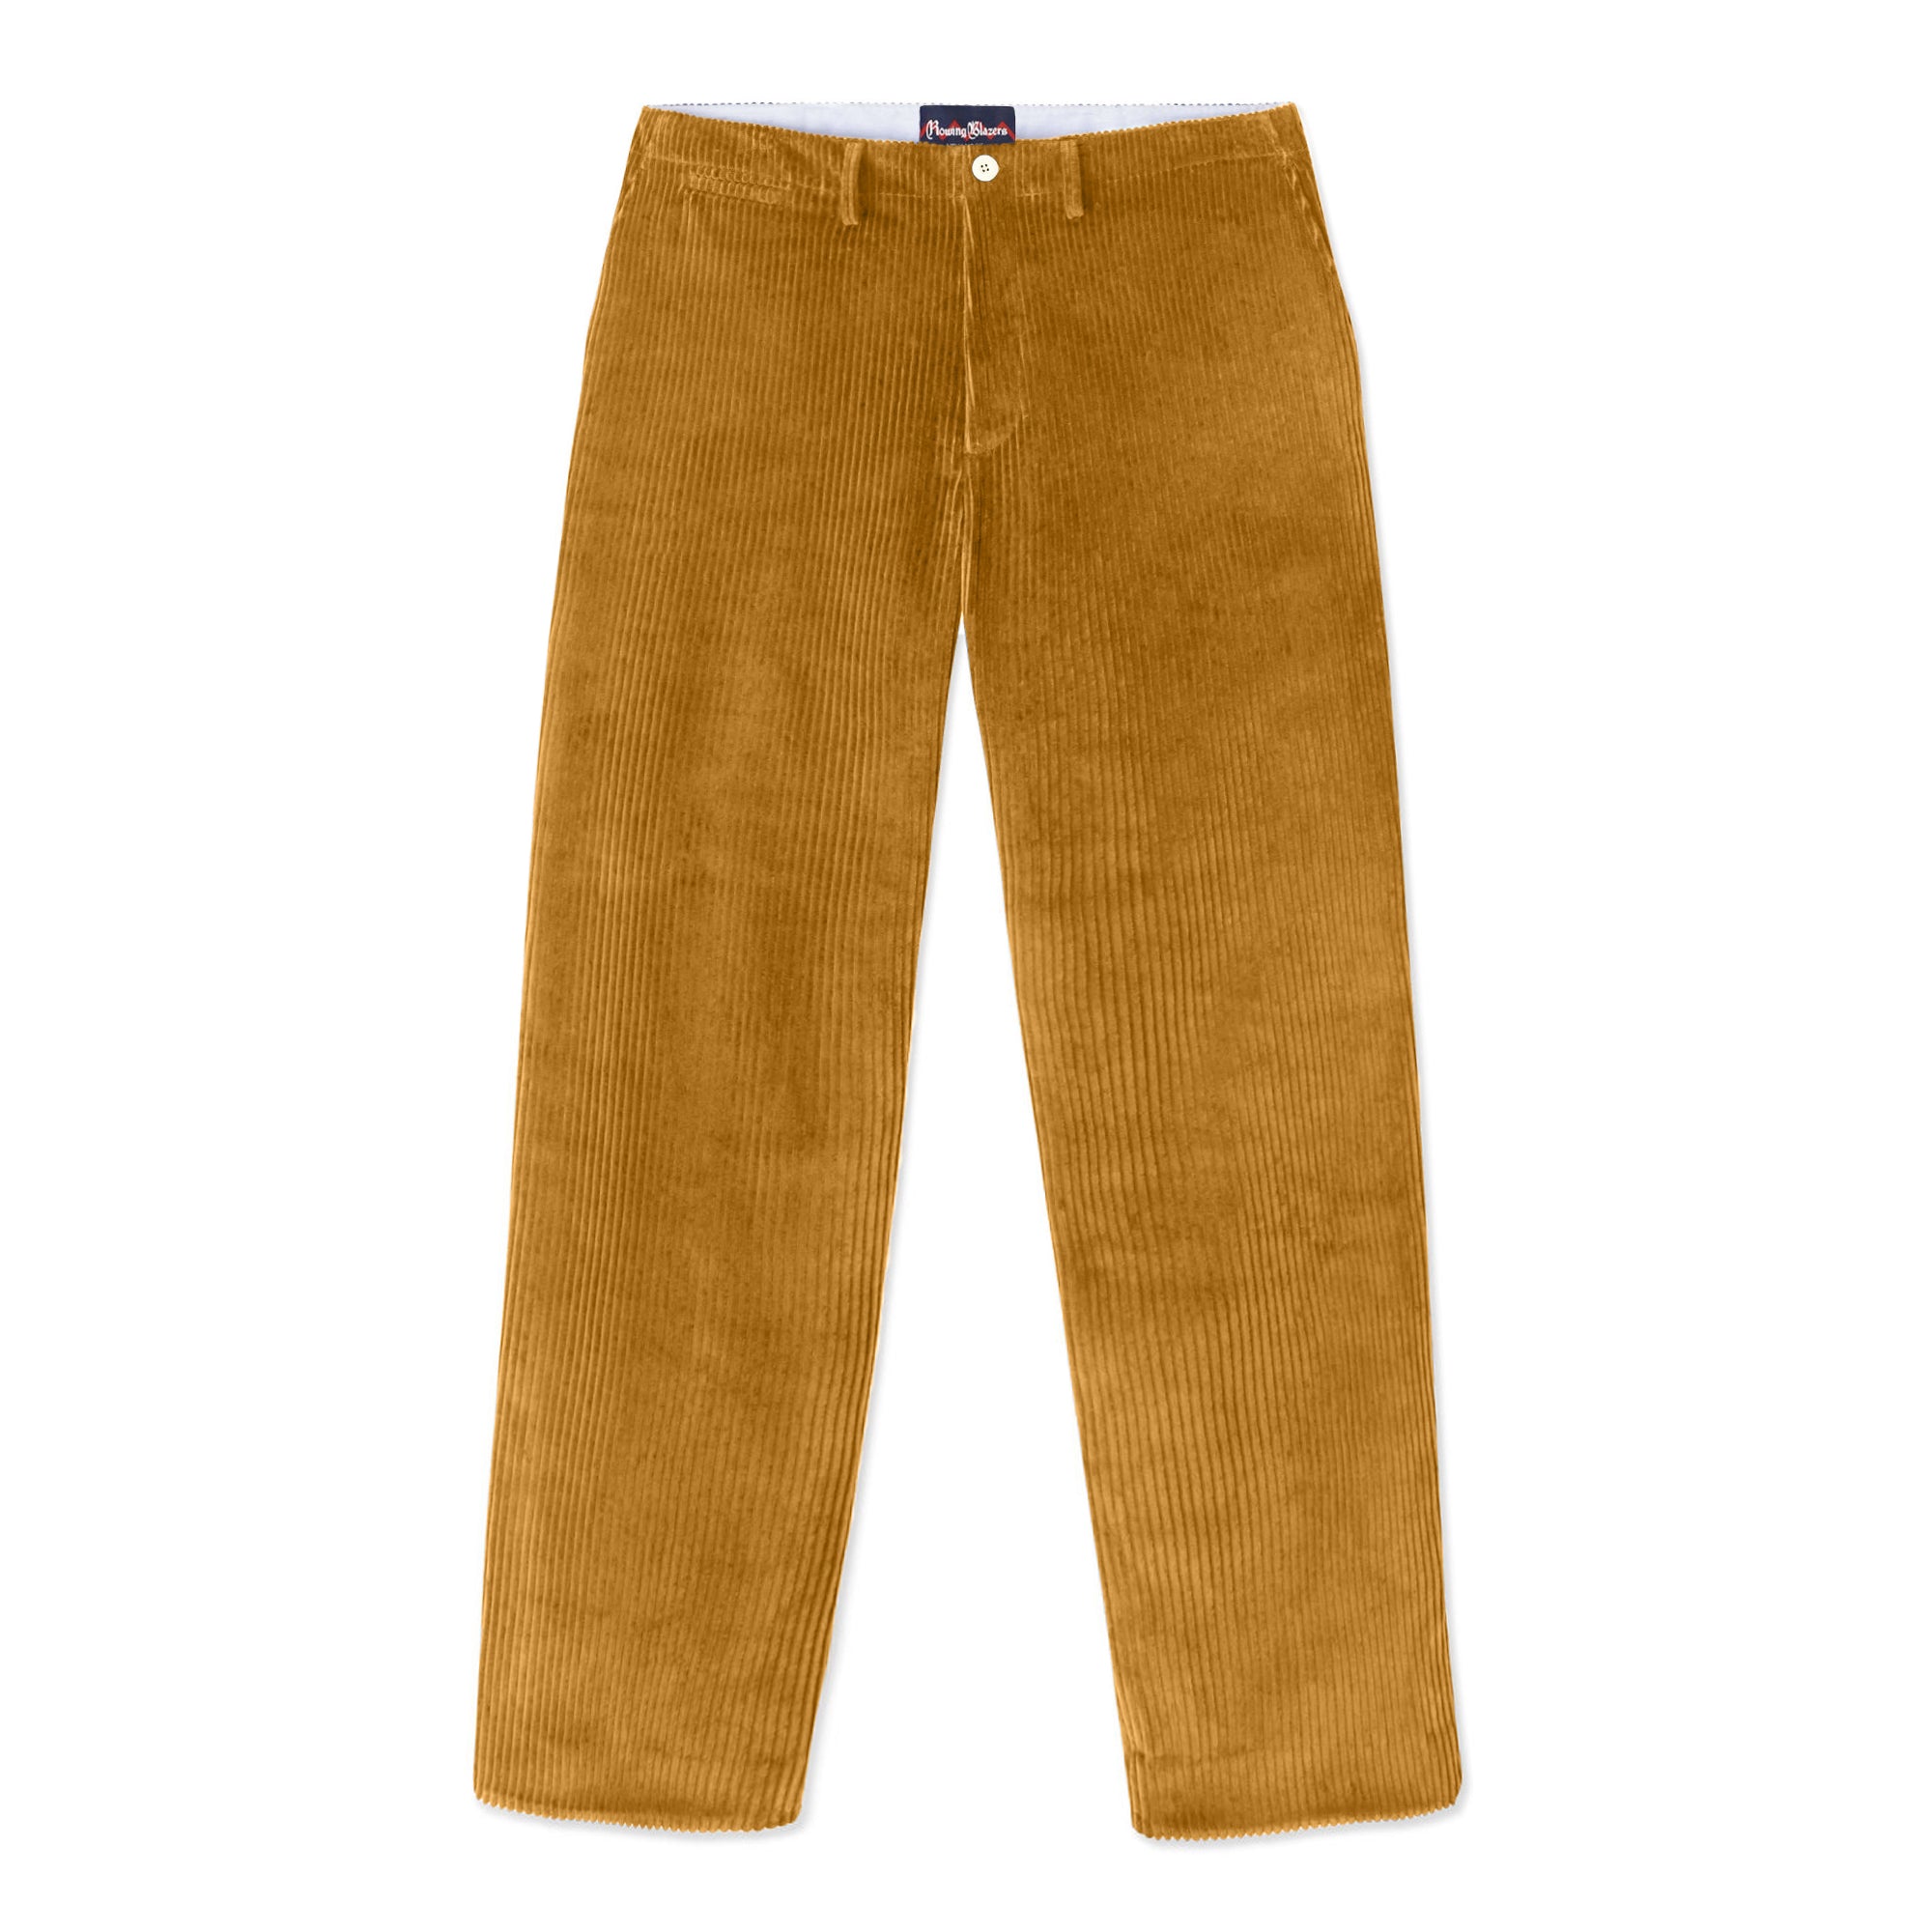 Buy Columbia Blue Corduroy Stretch Pants Online in India